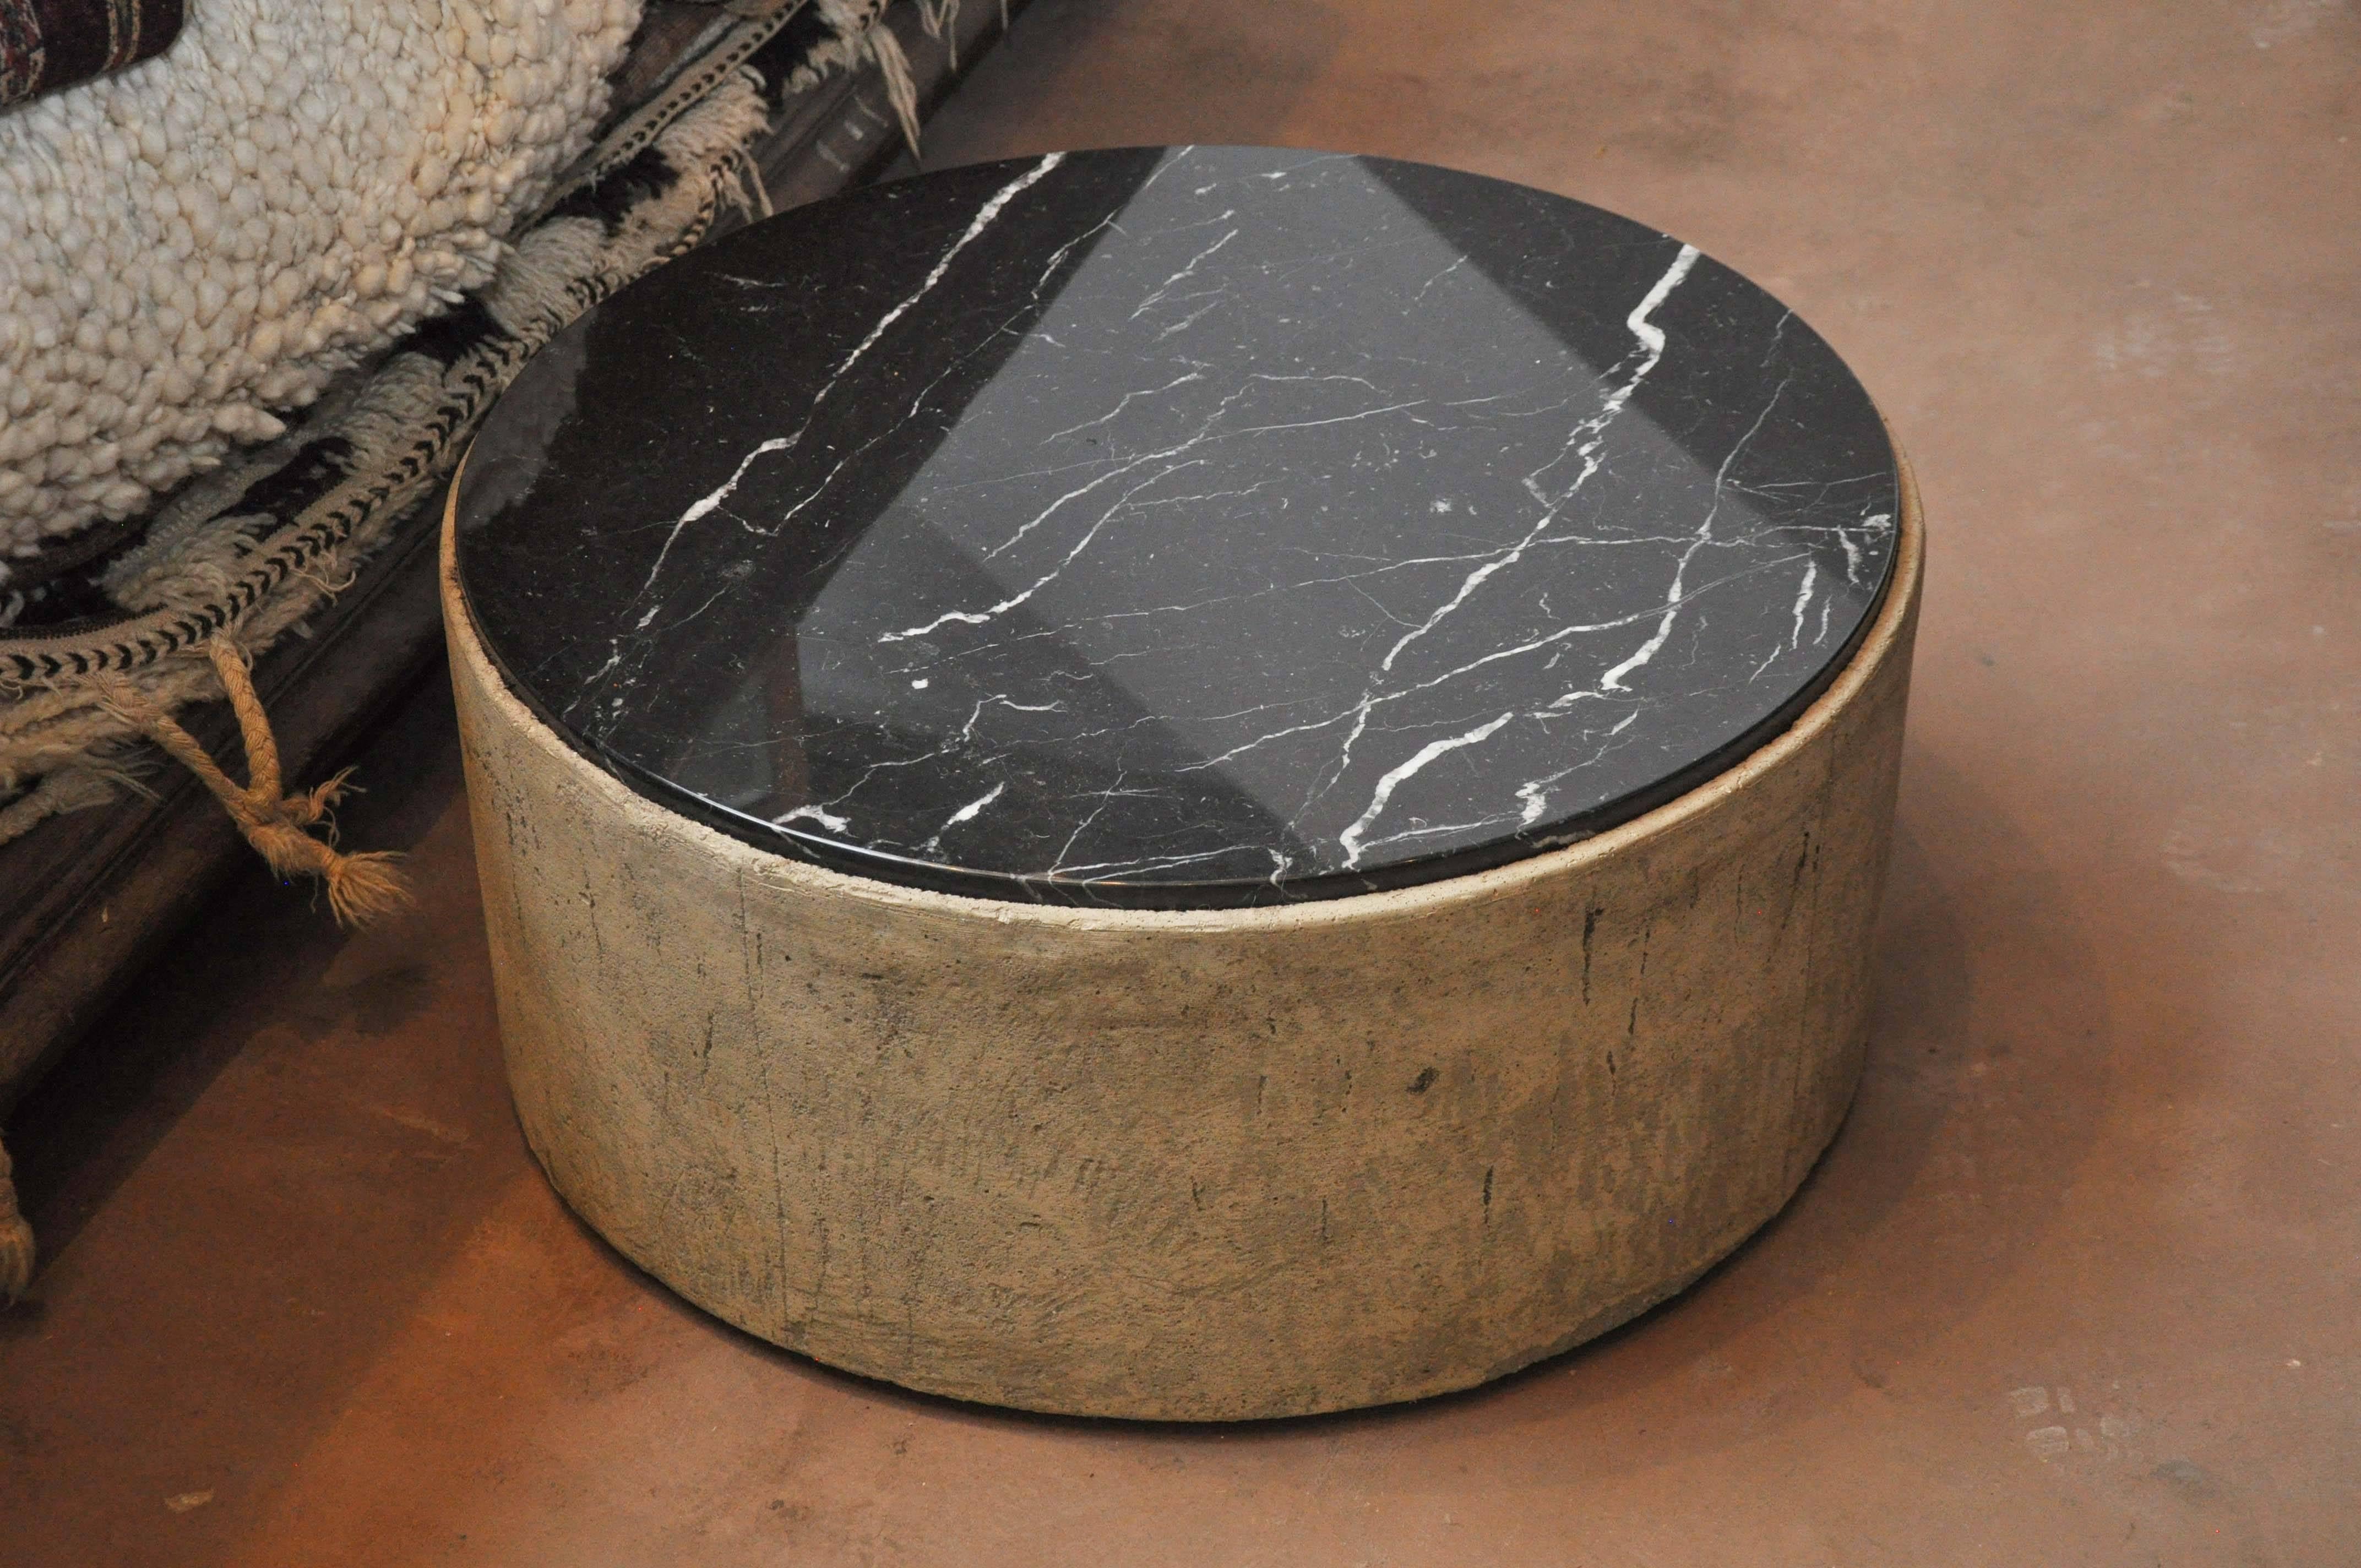 21st Century Custom Concrete and Marble Coffee Table. Rough concrete table base shown with black marble top. Unique blend of rough and refined, one of a kind. 

Dimensions: 30" diameter x 13.5"h